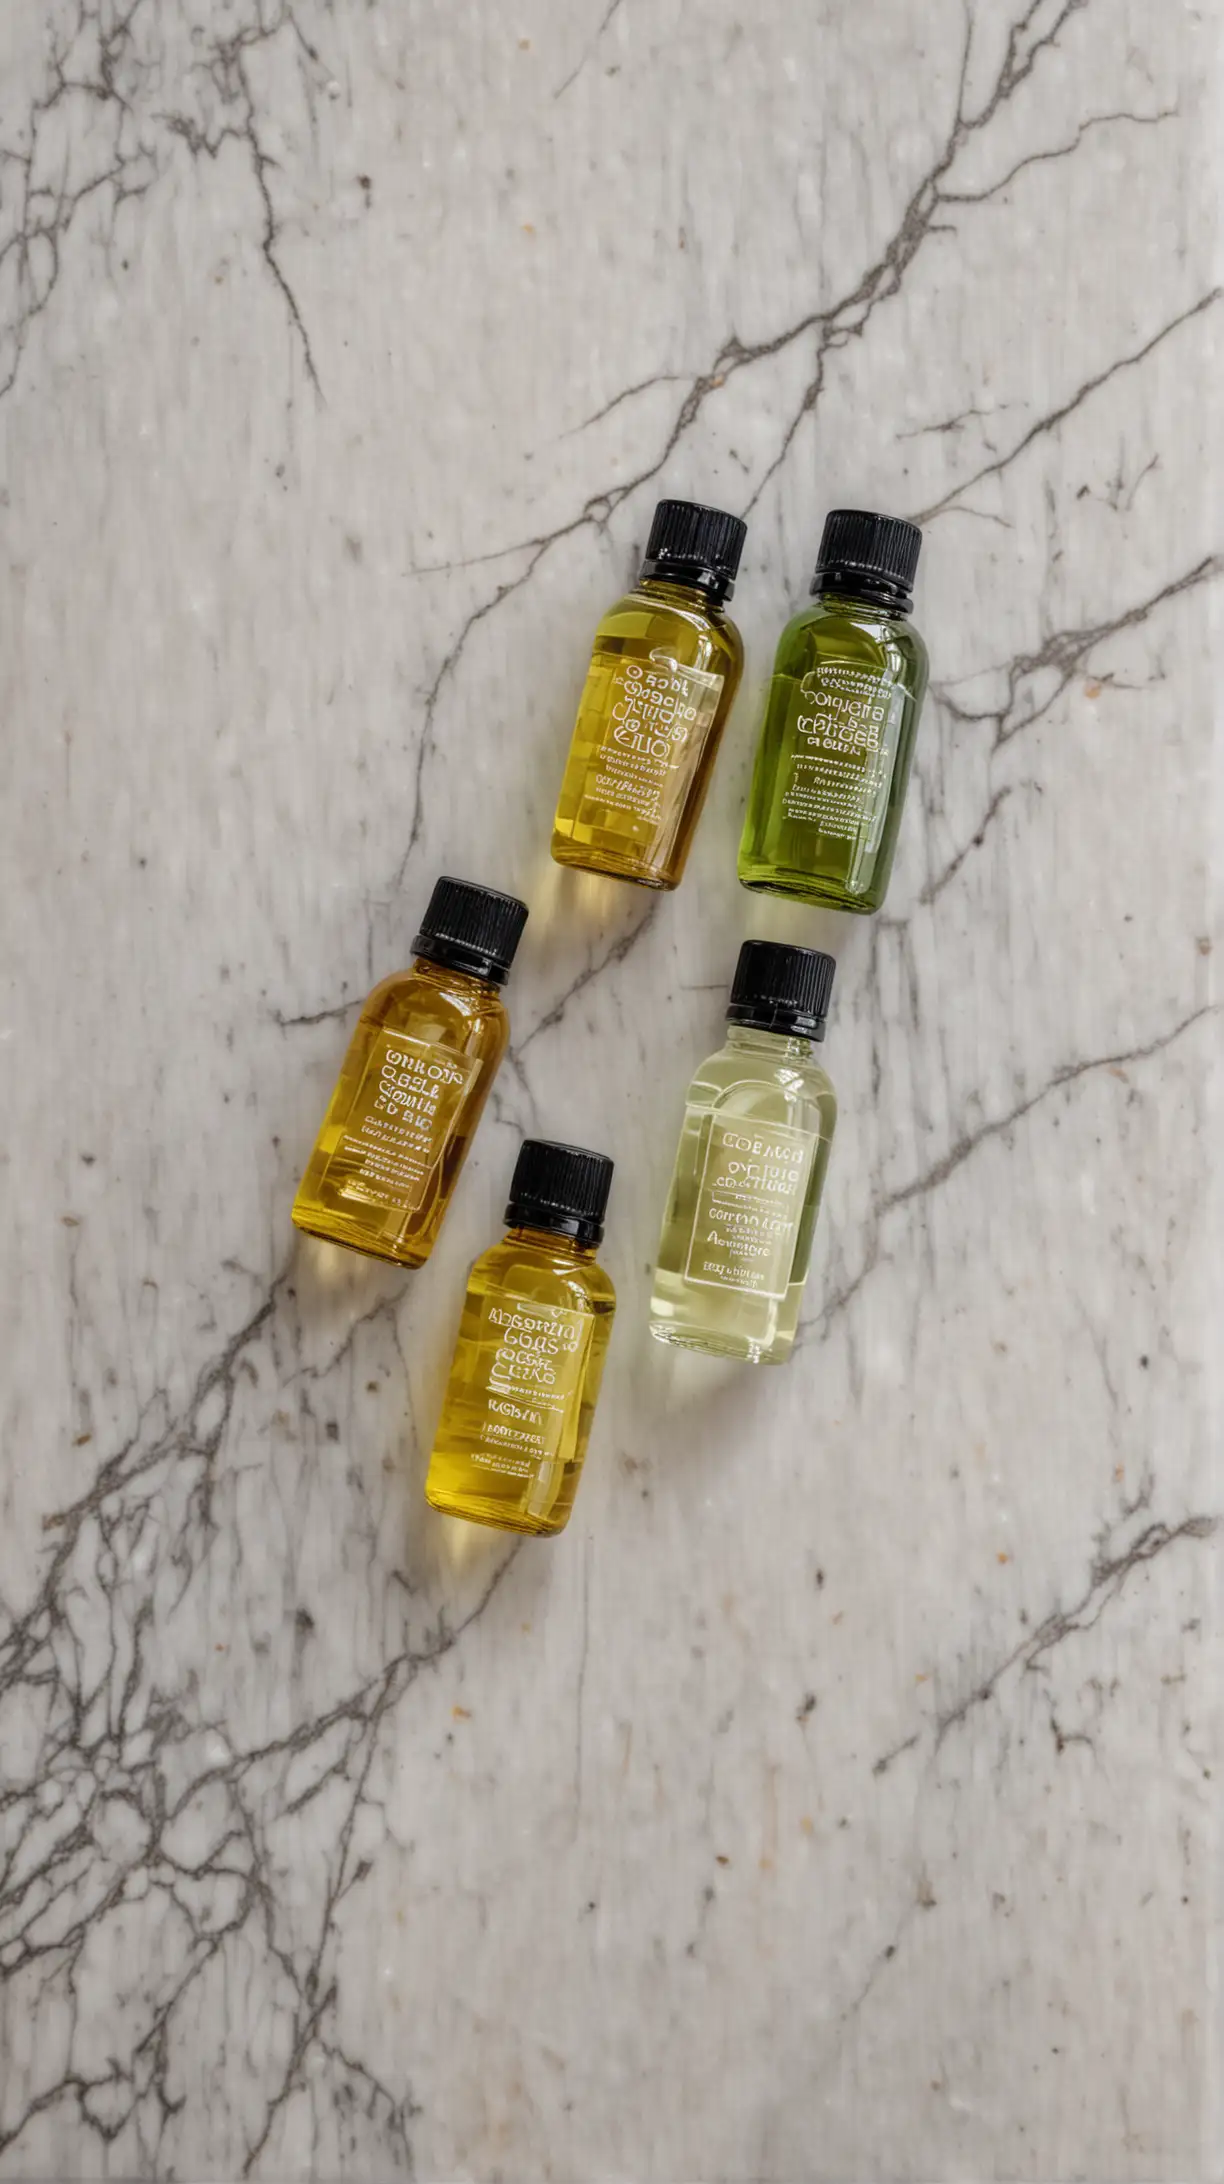 Assorted Carrier Oils Displayed on Marble Countertop